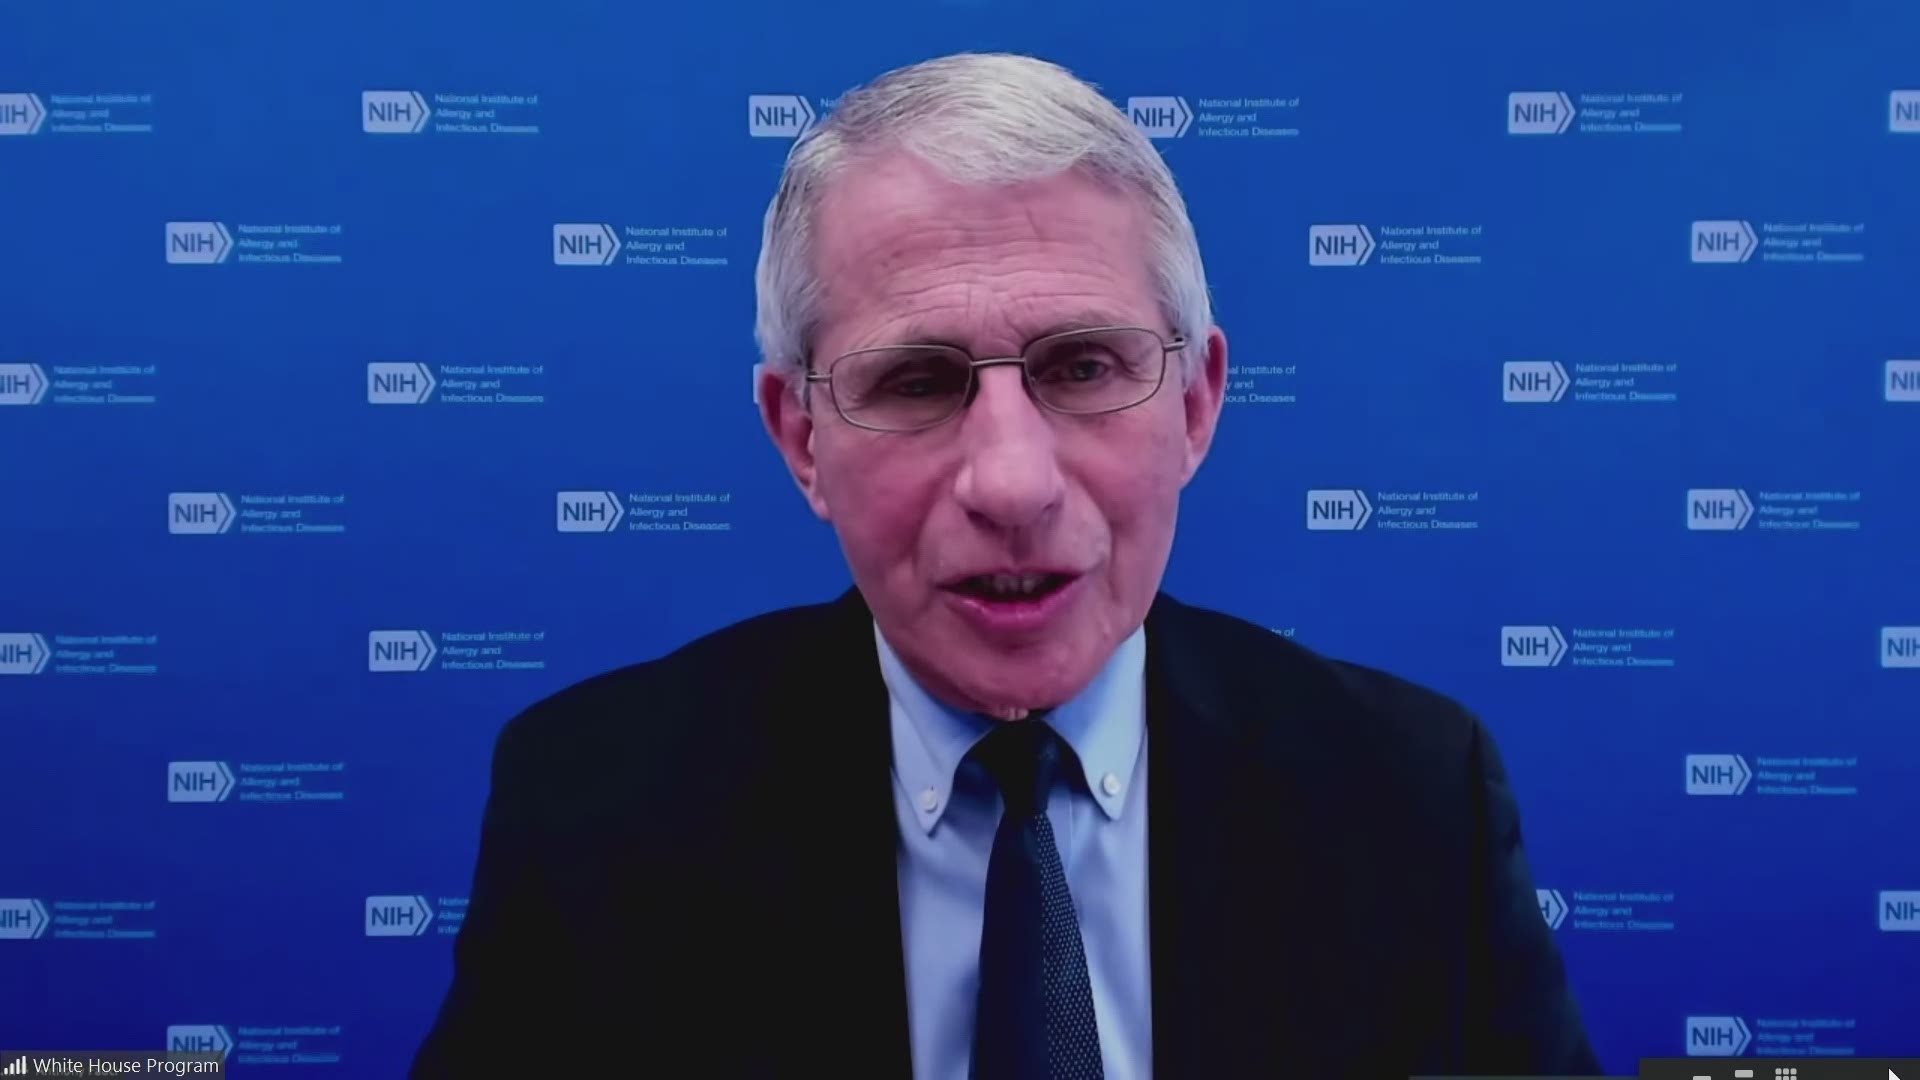 Dr. Anthony Fauci says if a coronavirus vaccine is available, regardless of which one, take it.